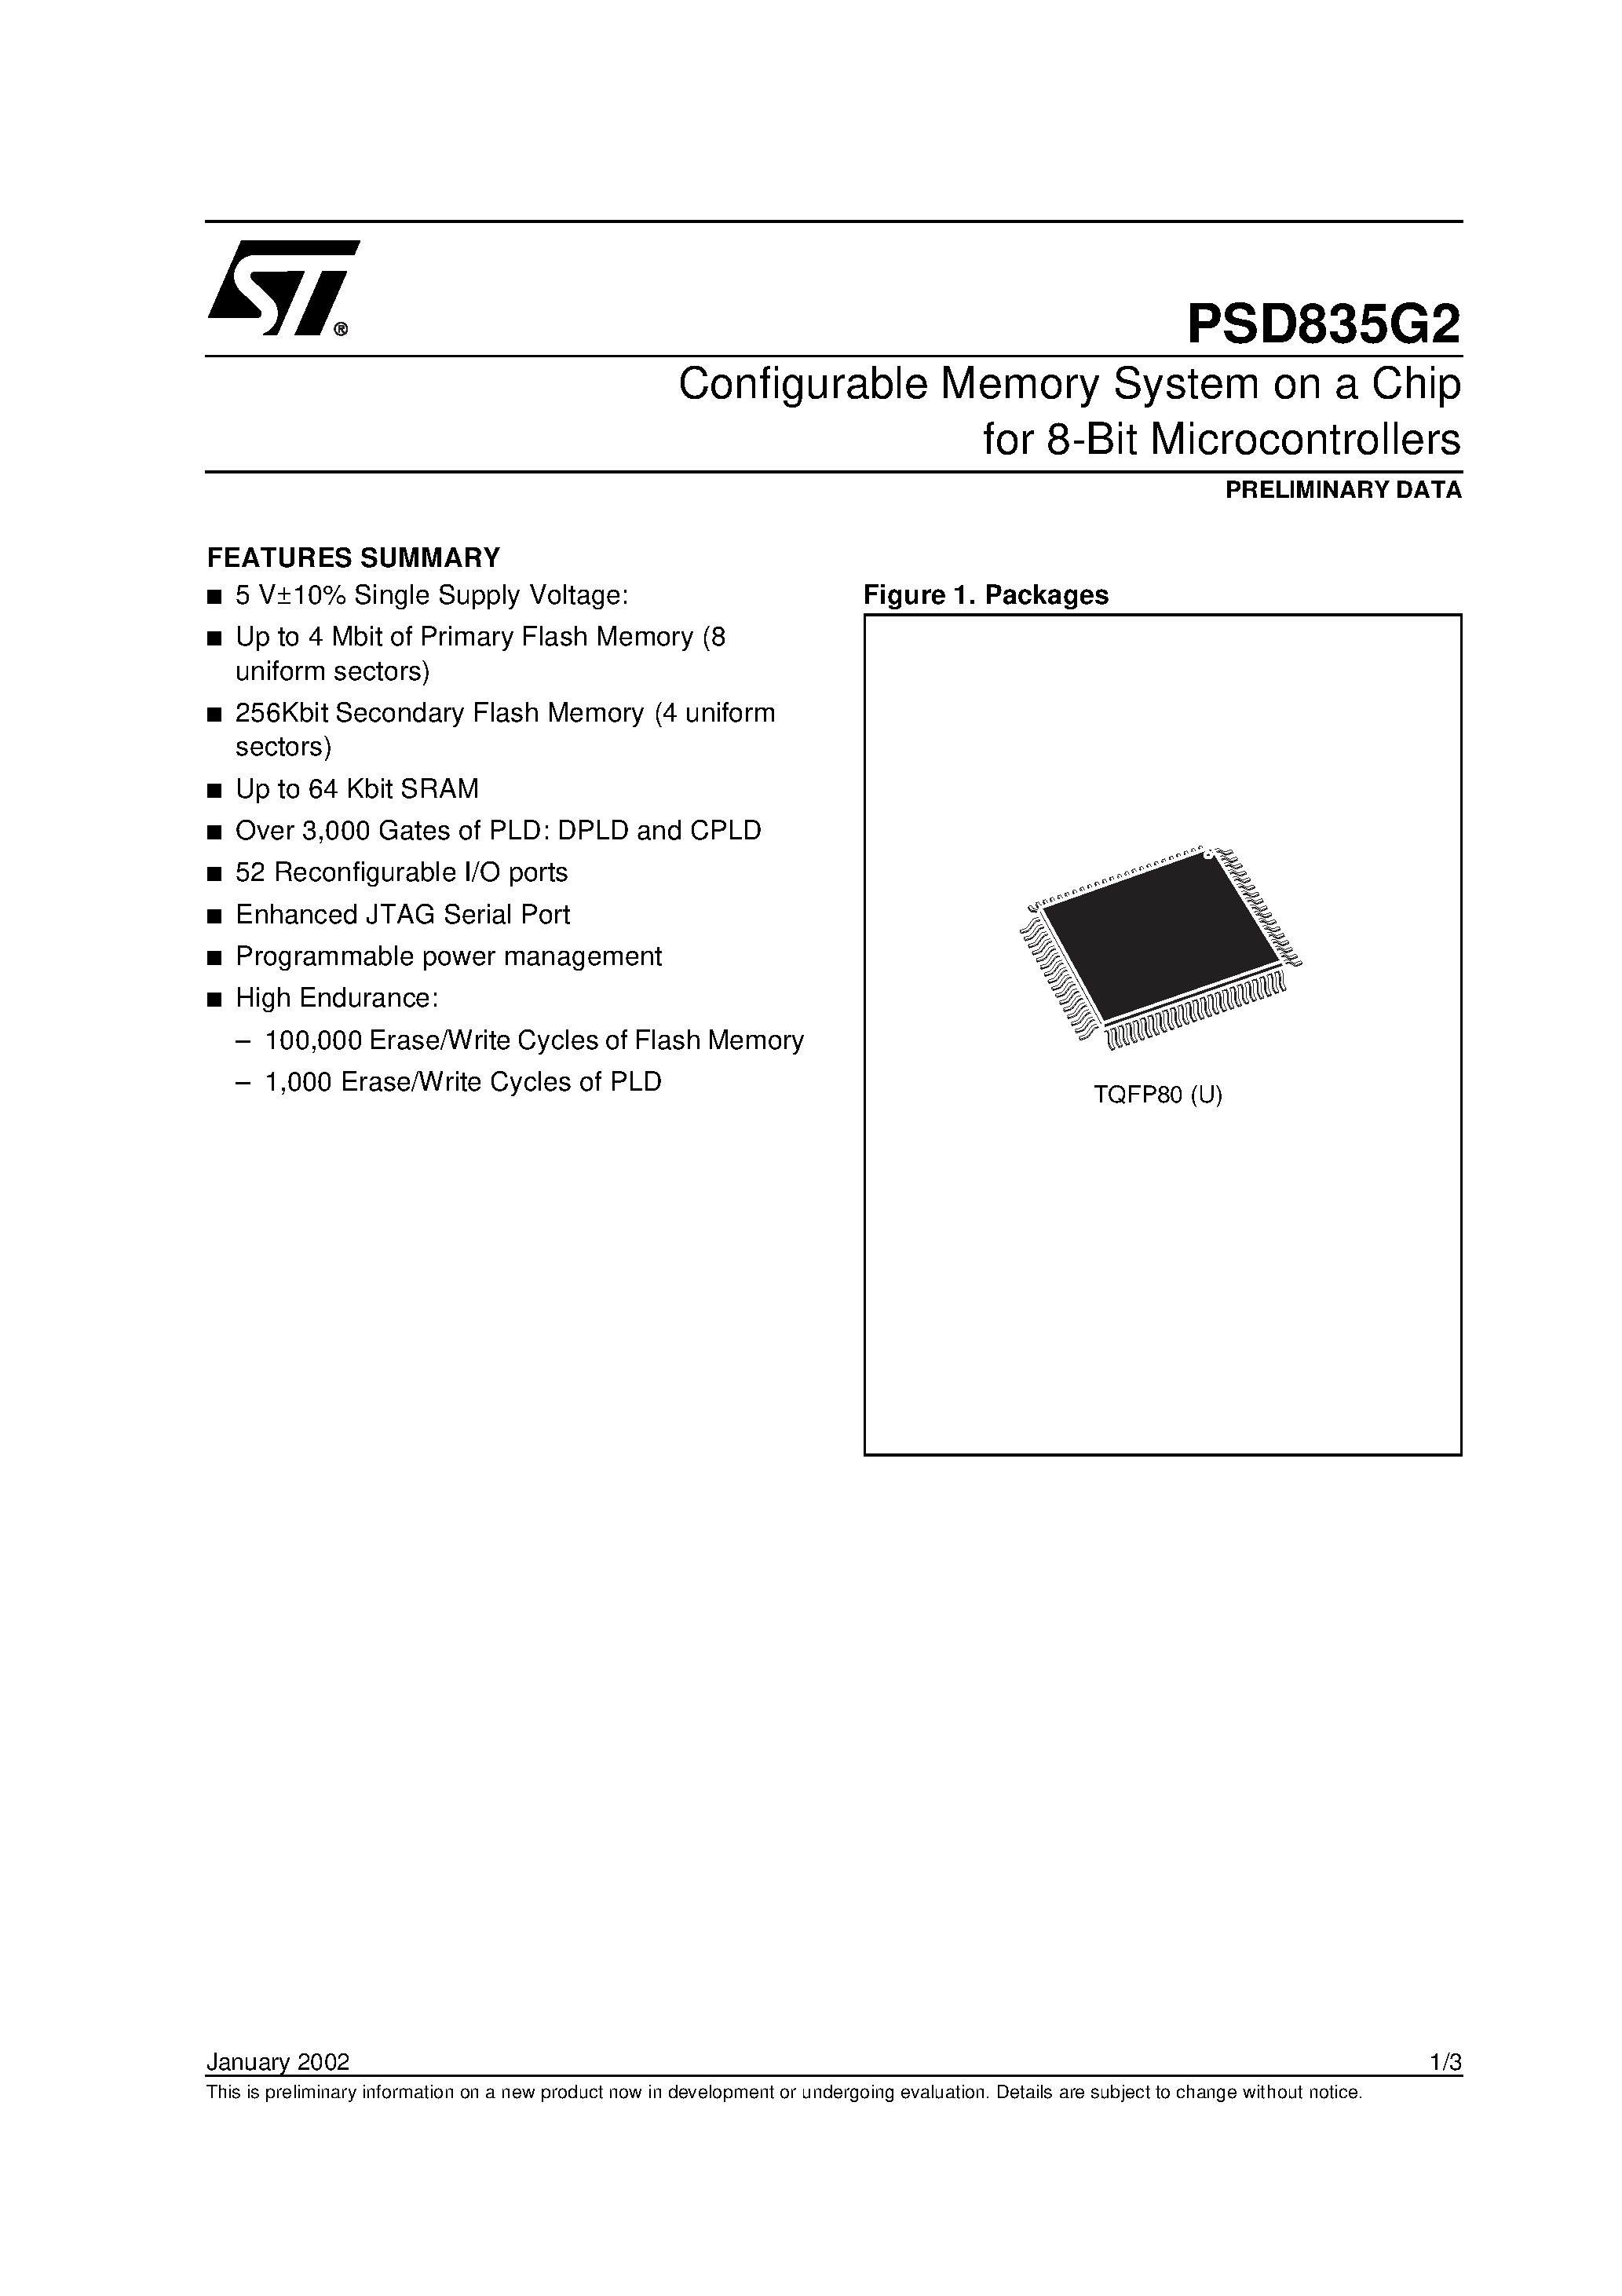 Datasheet PSD835F2V-A-70U - Configurable Memory System on a Chip for 8-Bit Microcontrollers page 1